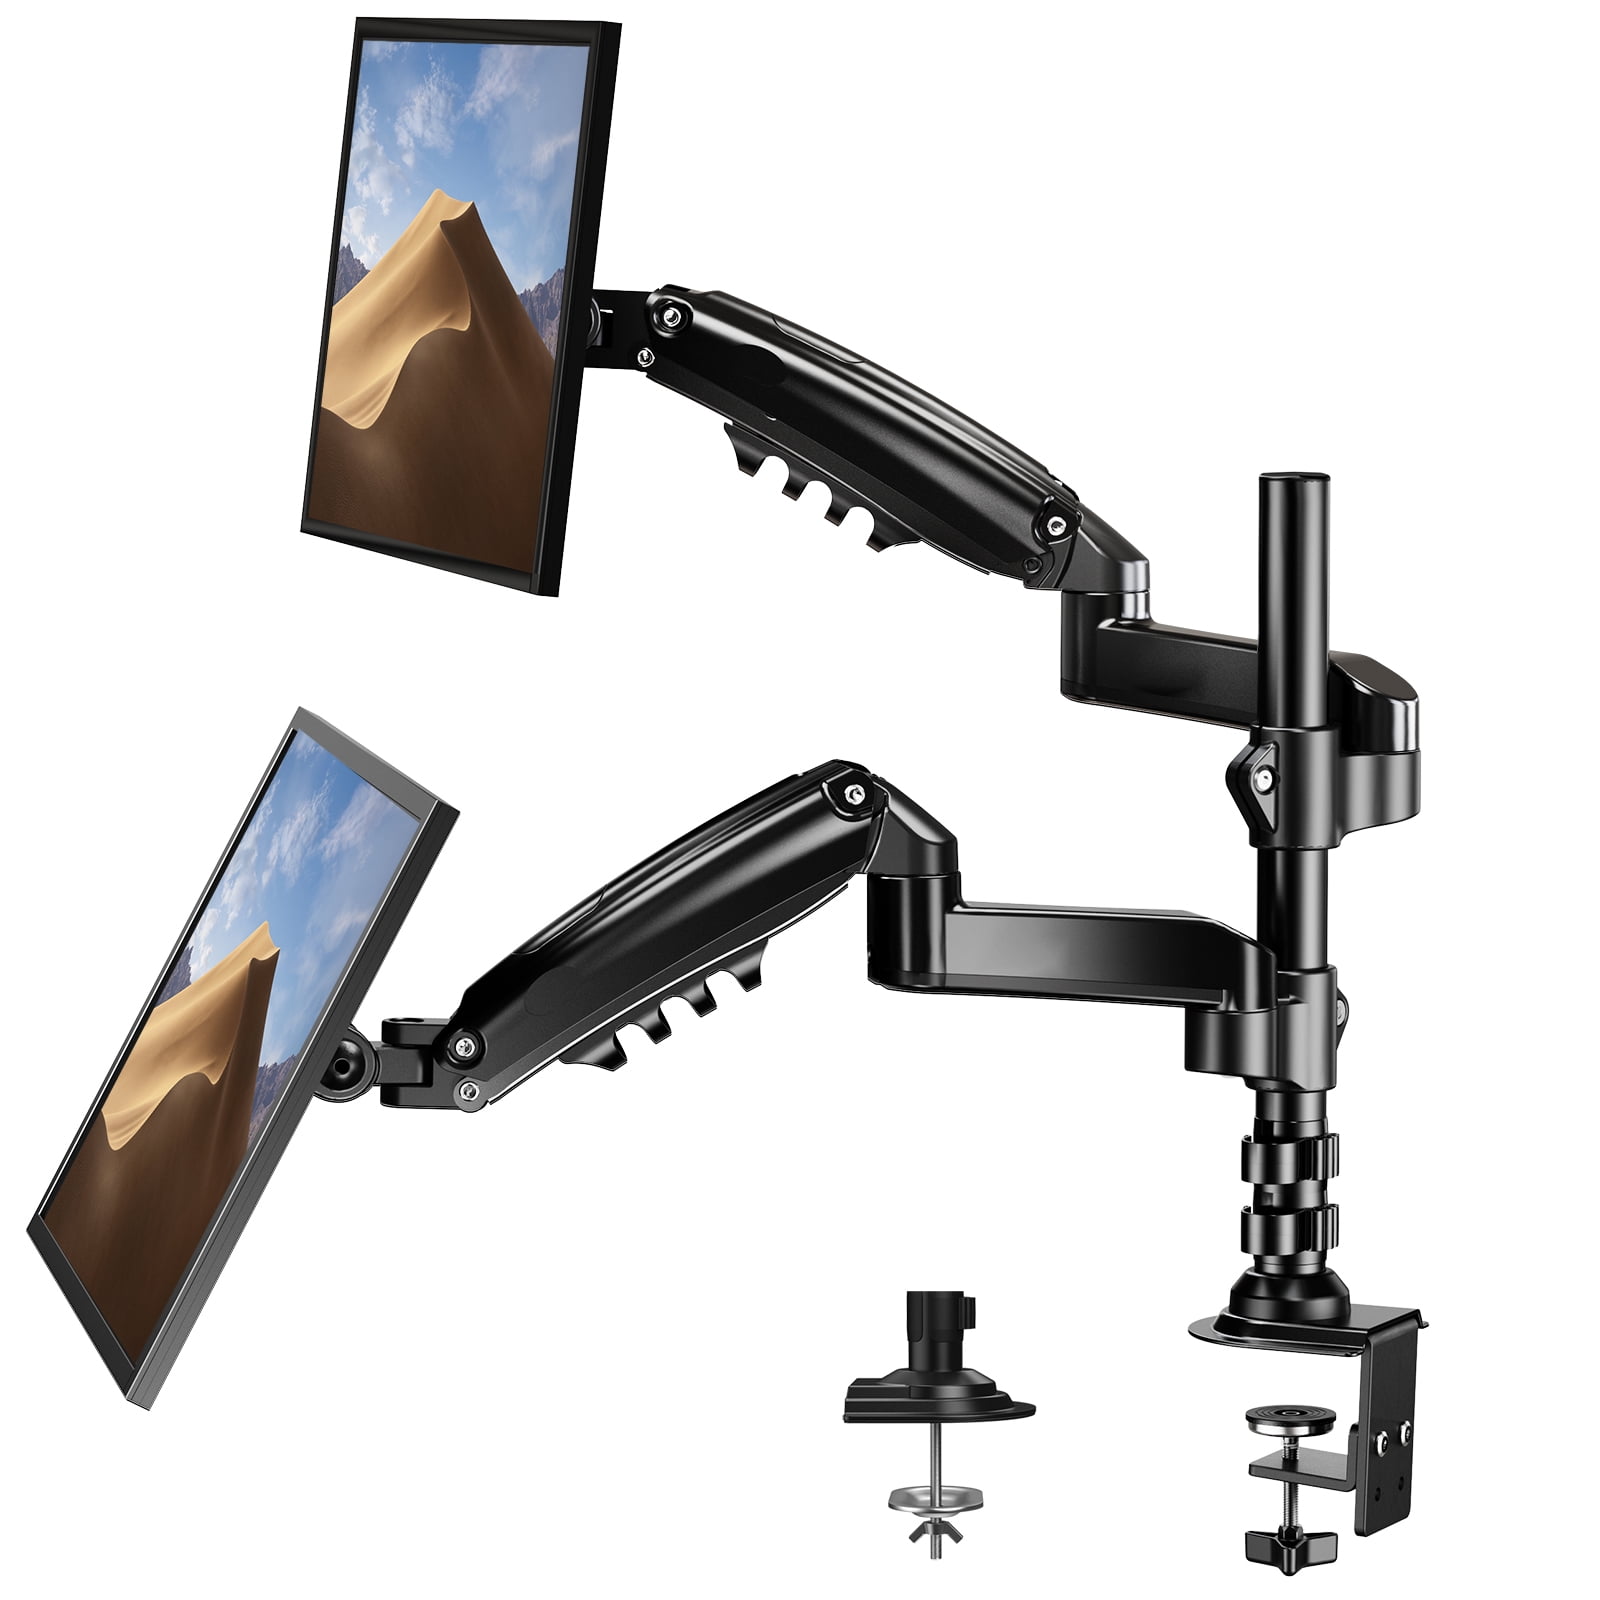 Dual Height Adjustable Monitor Stand, Desk Mount for Two LCD